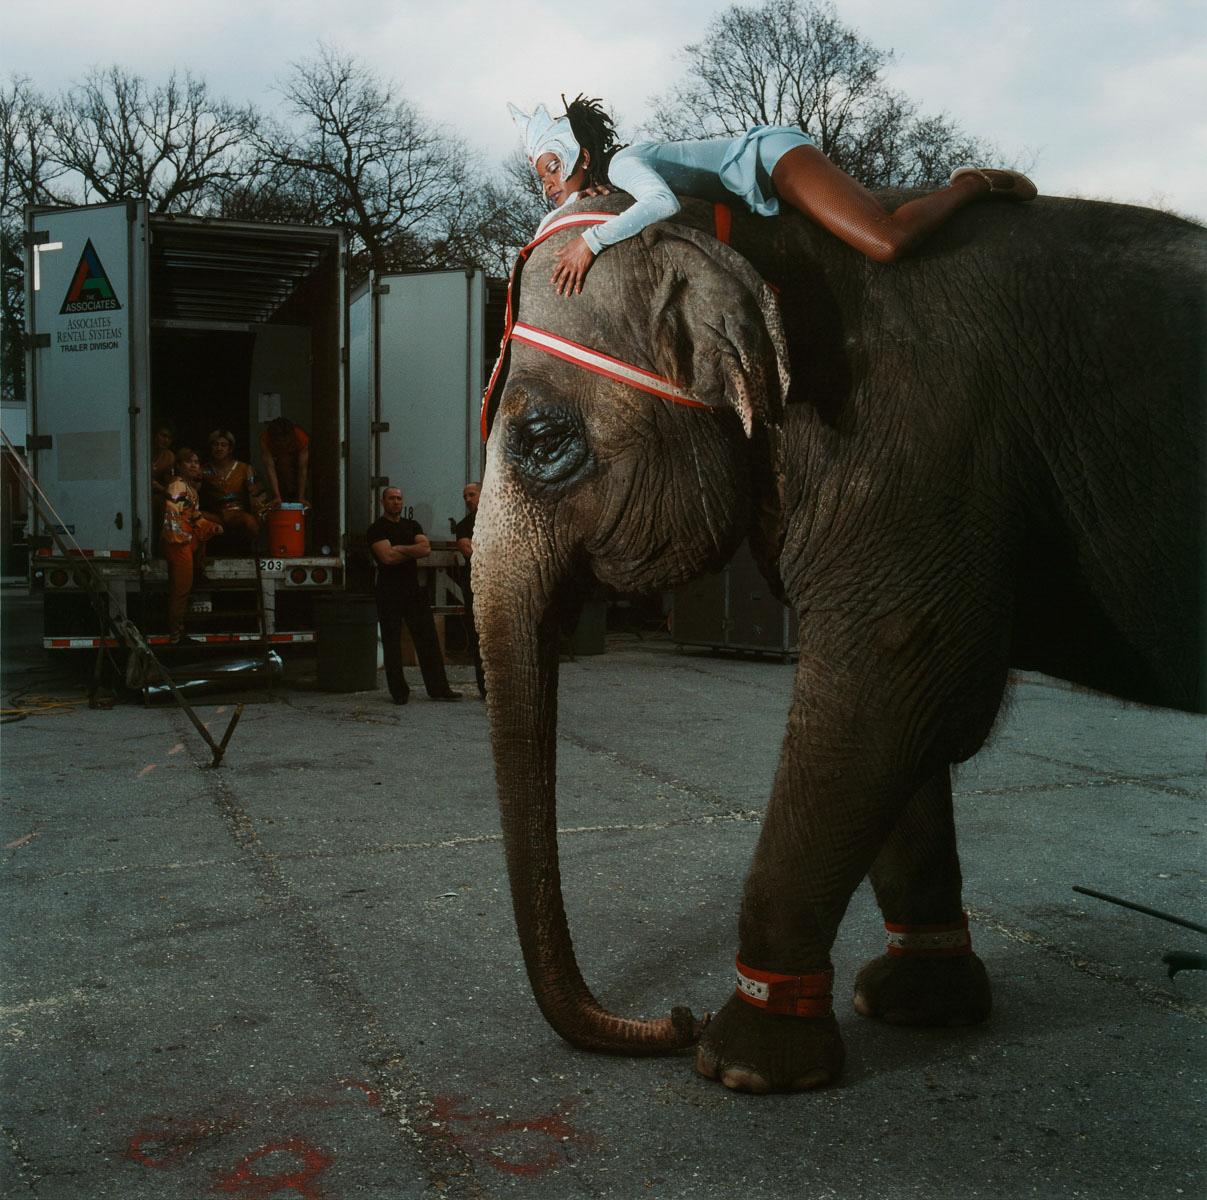 Brian Finke Color Photograph - Untitled (Circus no. 3)